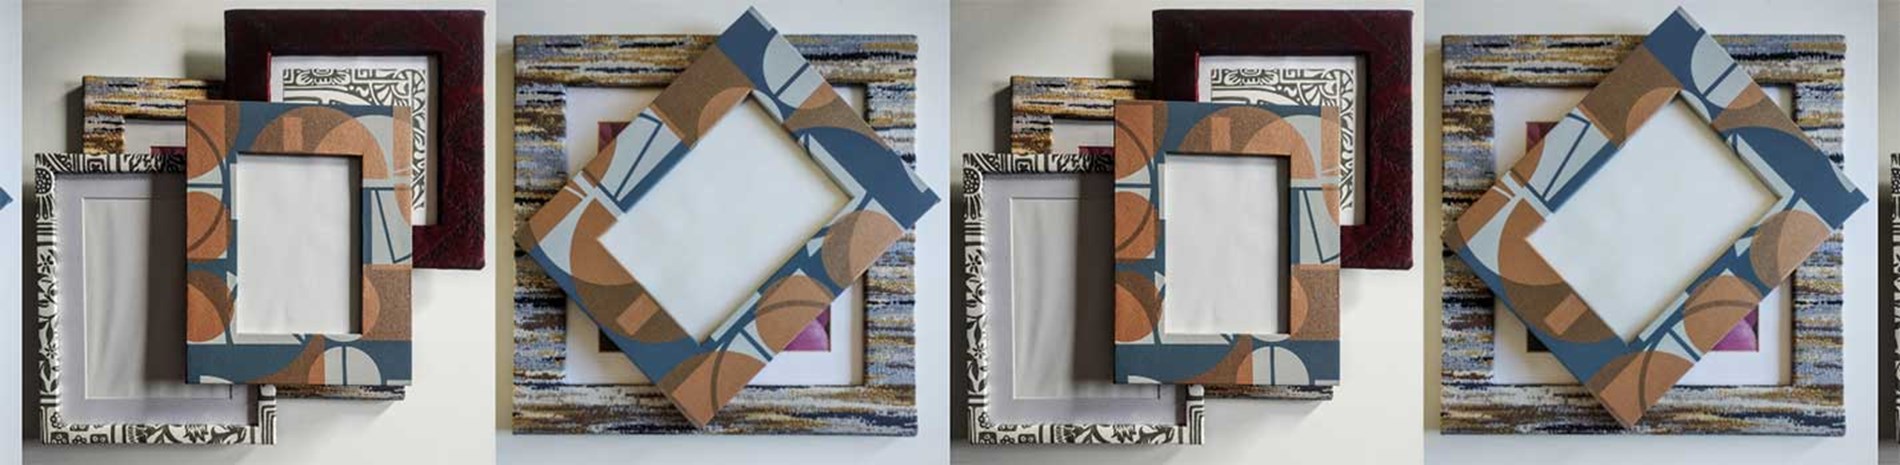 Repeated images of upcycled frames piled atop one another. One frame has stripes painted onto it.